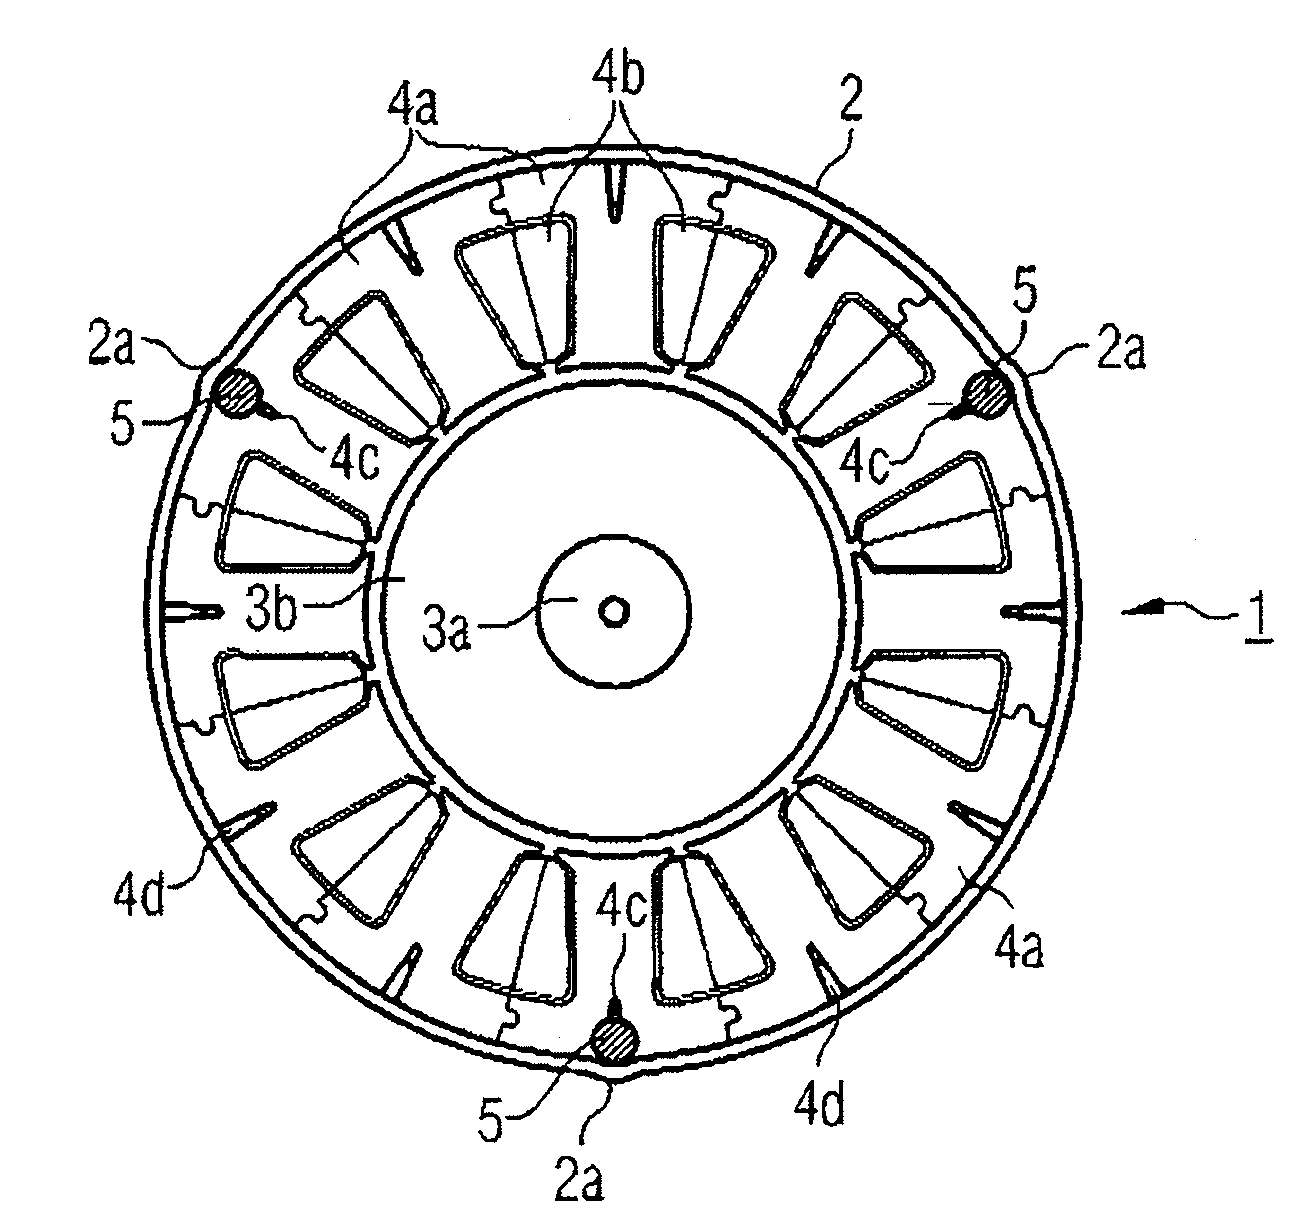 Electric motor and method for manufacturing an electric motor for a motor vehicle actuator drive